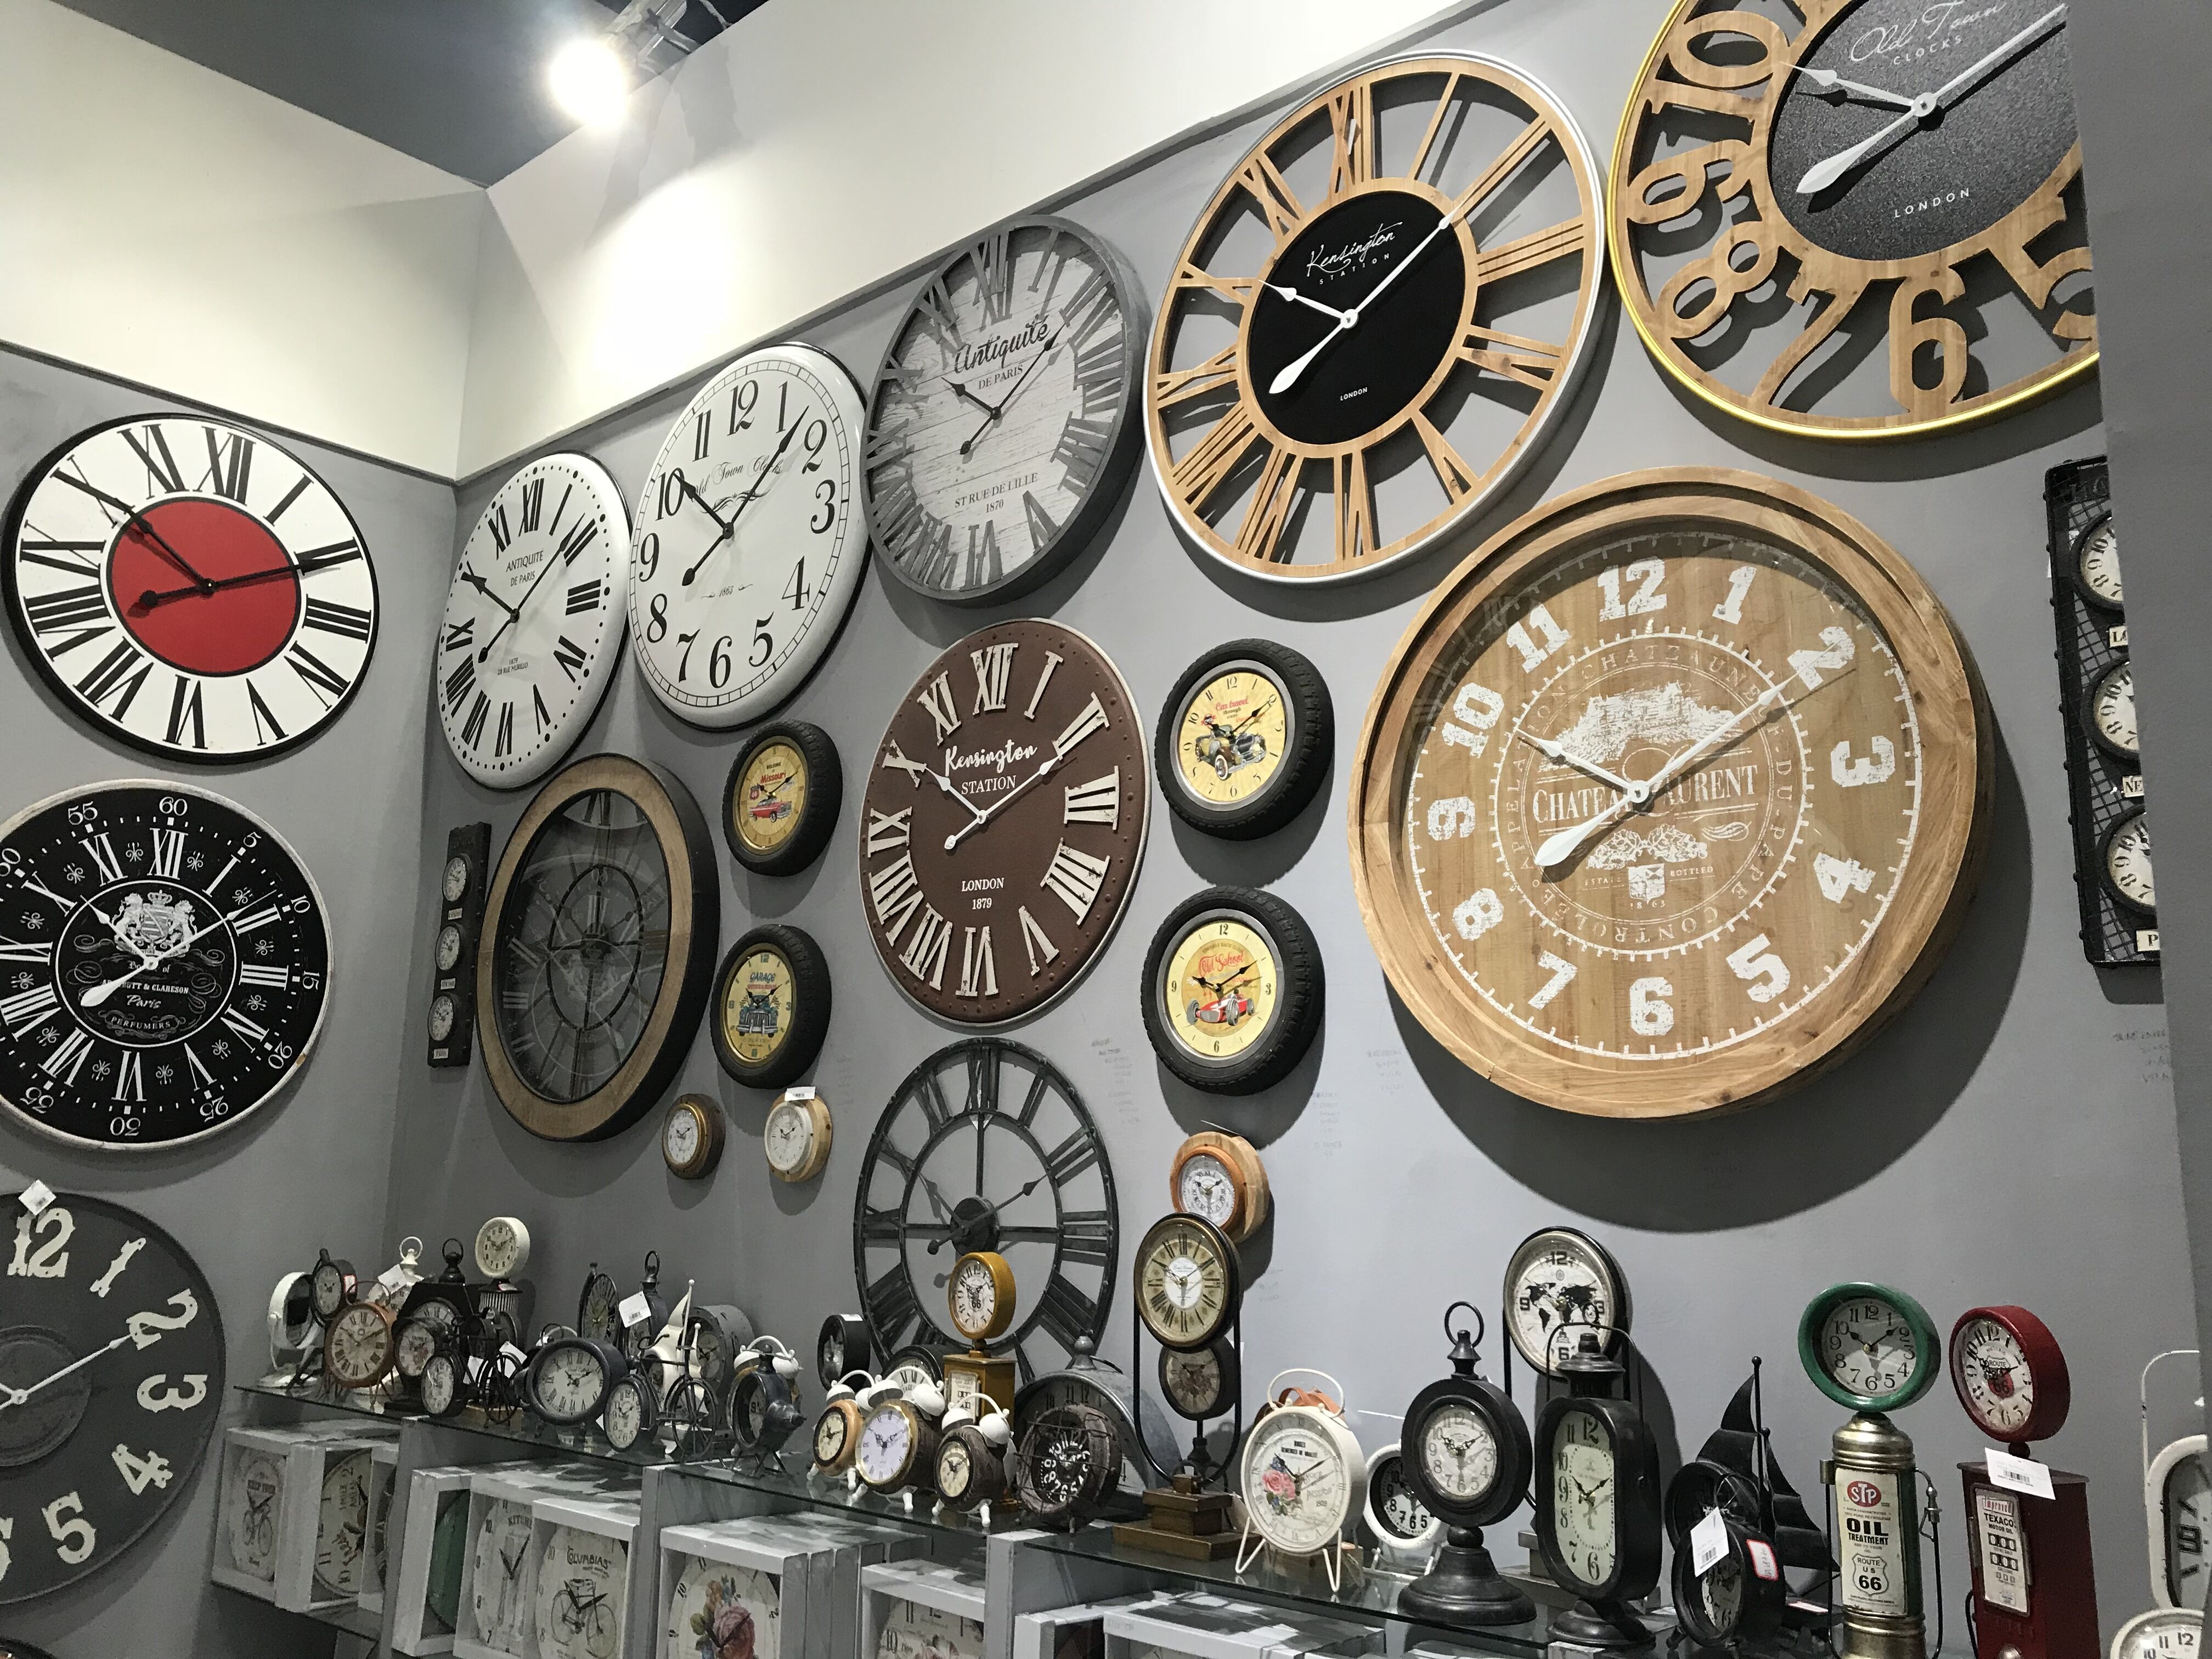 Wholesale Gifts Classic Modern New Design MDF Blank Wall Clock